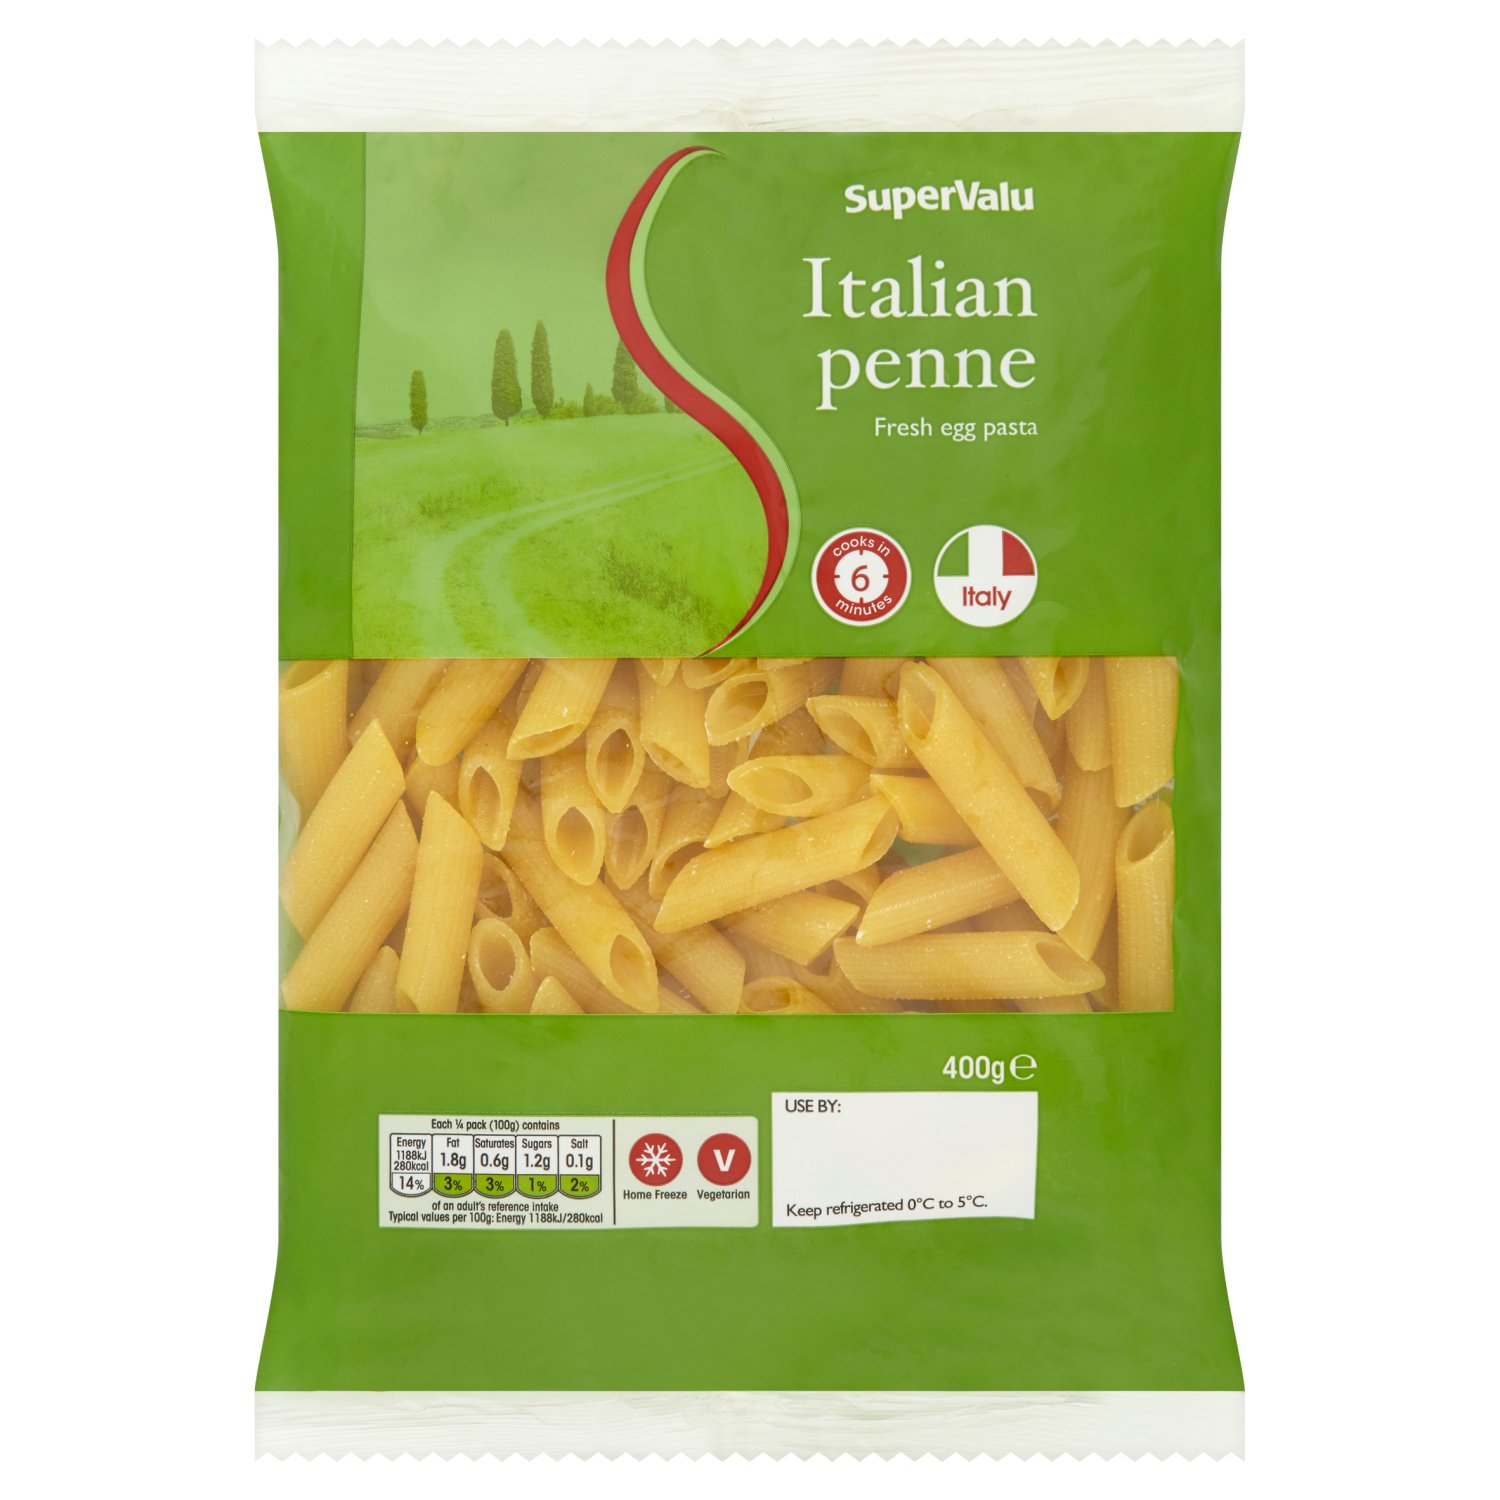 Penne
Enjoy a fresh, authentic Italian pasta made with only the finest ingredients. Using premium durum wheat and fresh eggs, SuperValu has created a perfect pasta for every occasion.